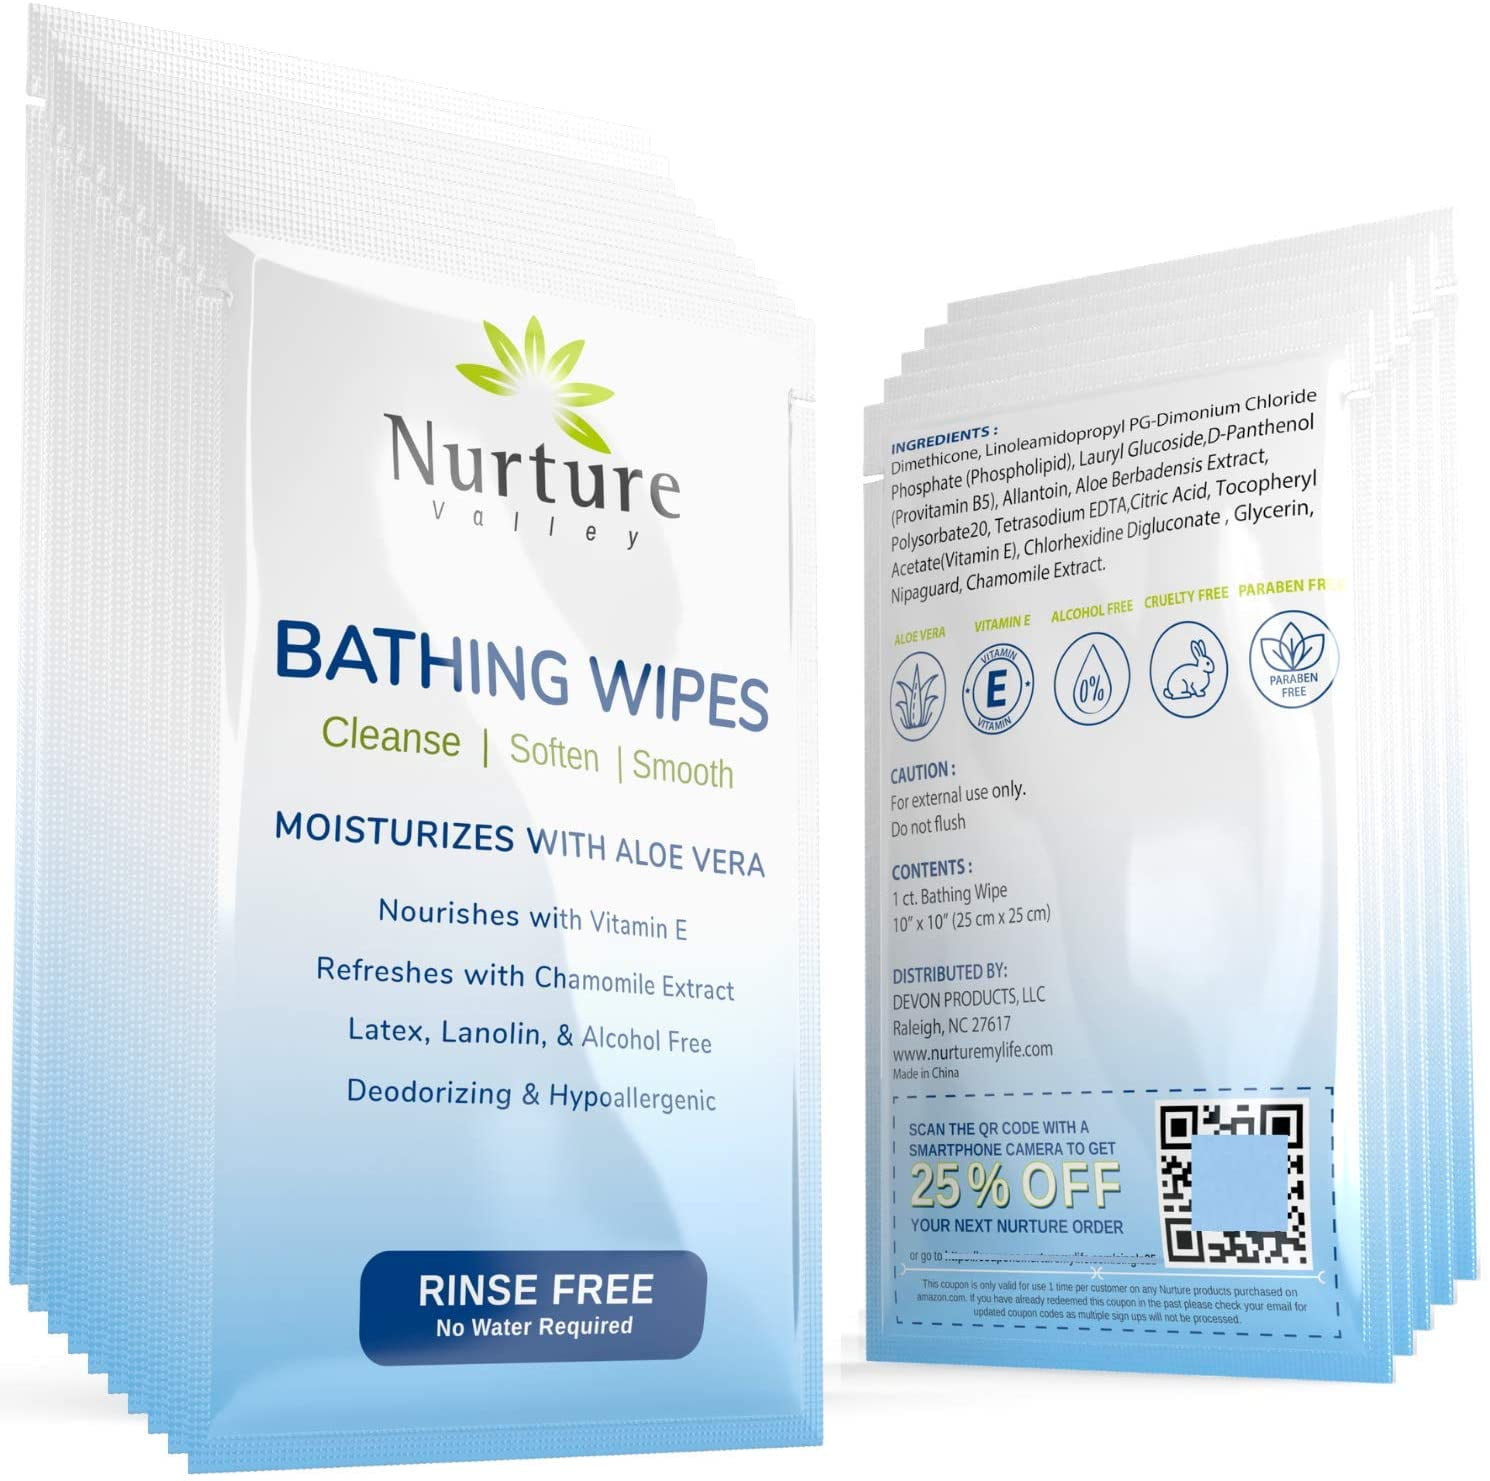 Large Body Wipes for Adults Bathing. Biodegradable with Aloe